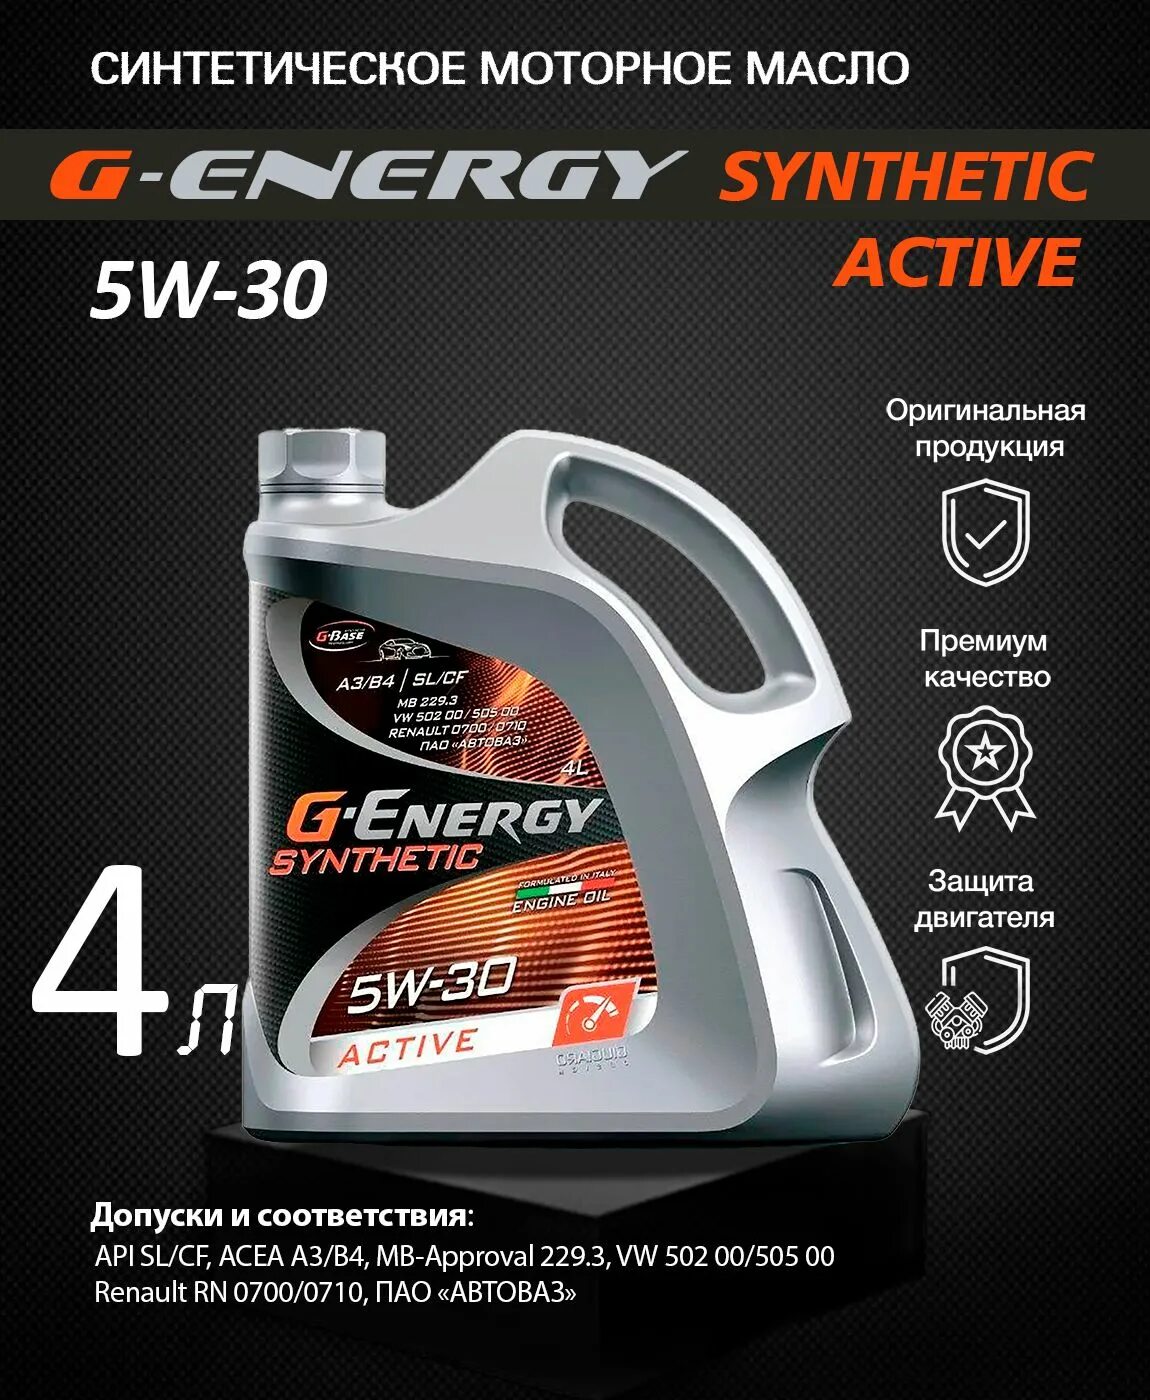 G energy synthetic active отзывы. G-Energy Synthetic super start 5w30 4л. G-Energy Synthetic Active 5w30 4л синт.. G-Energy far East синтетика 5w-30. G-Energy Synthetic super start 5w-30.